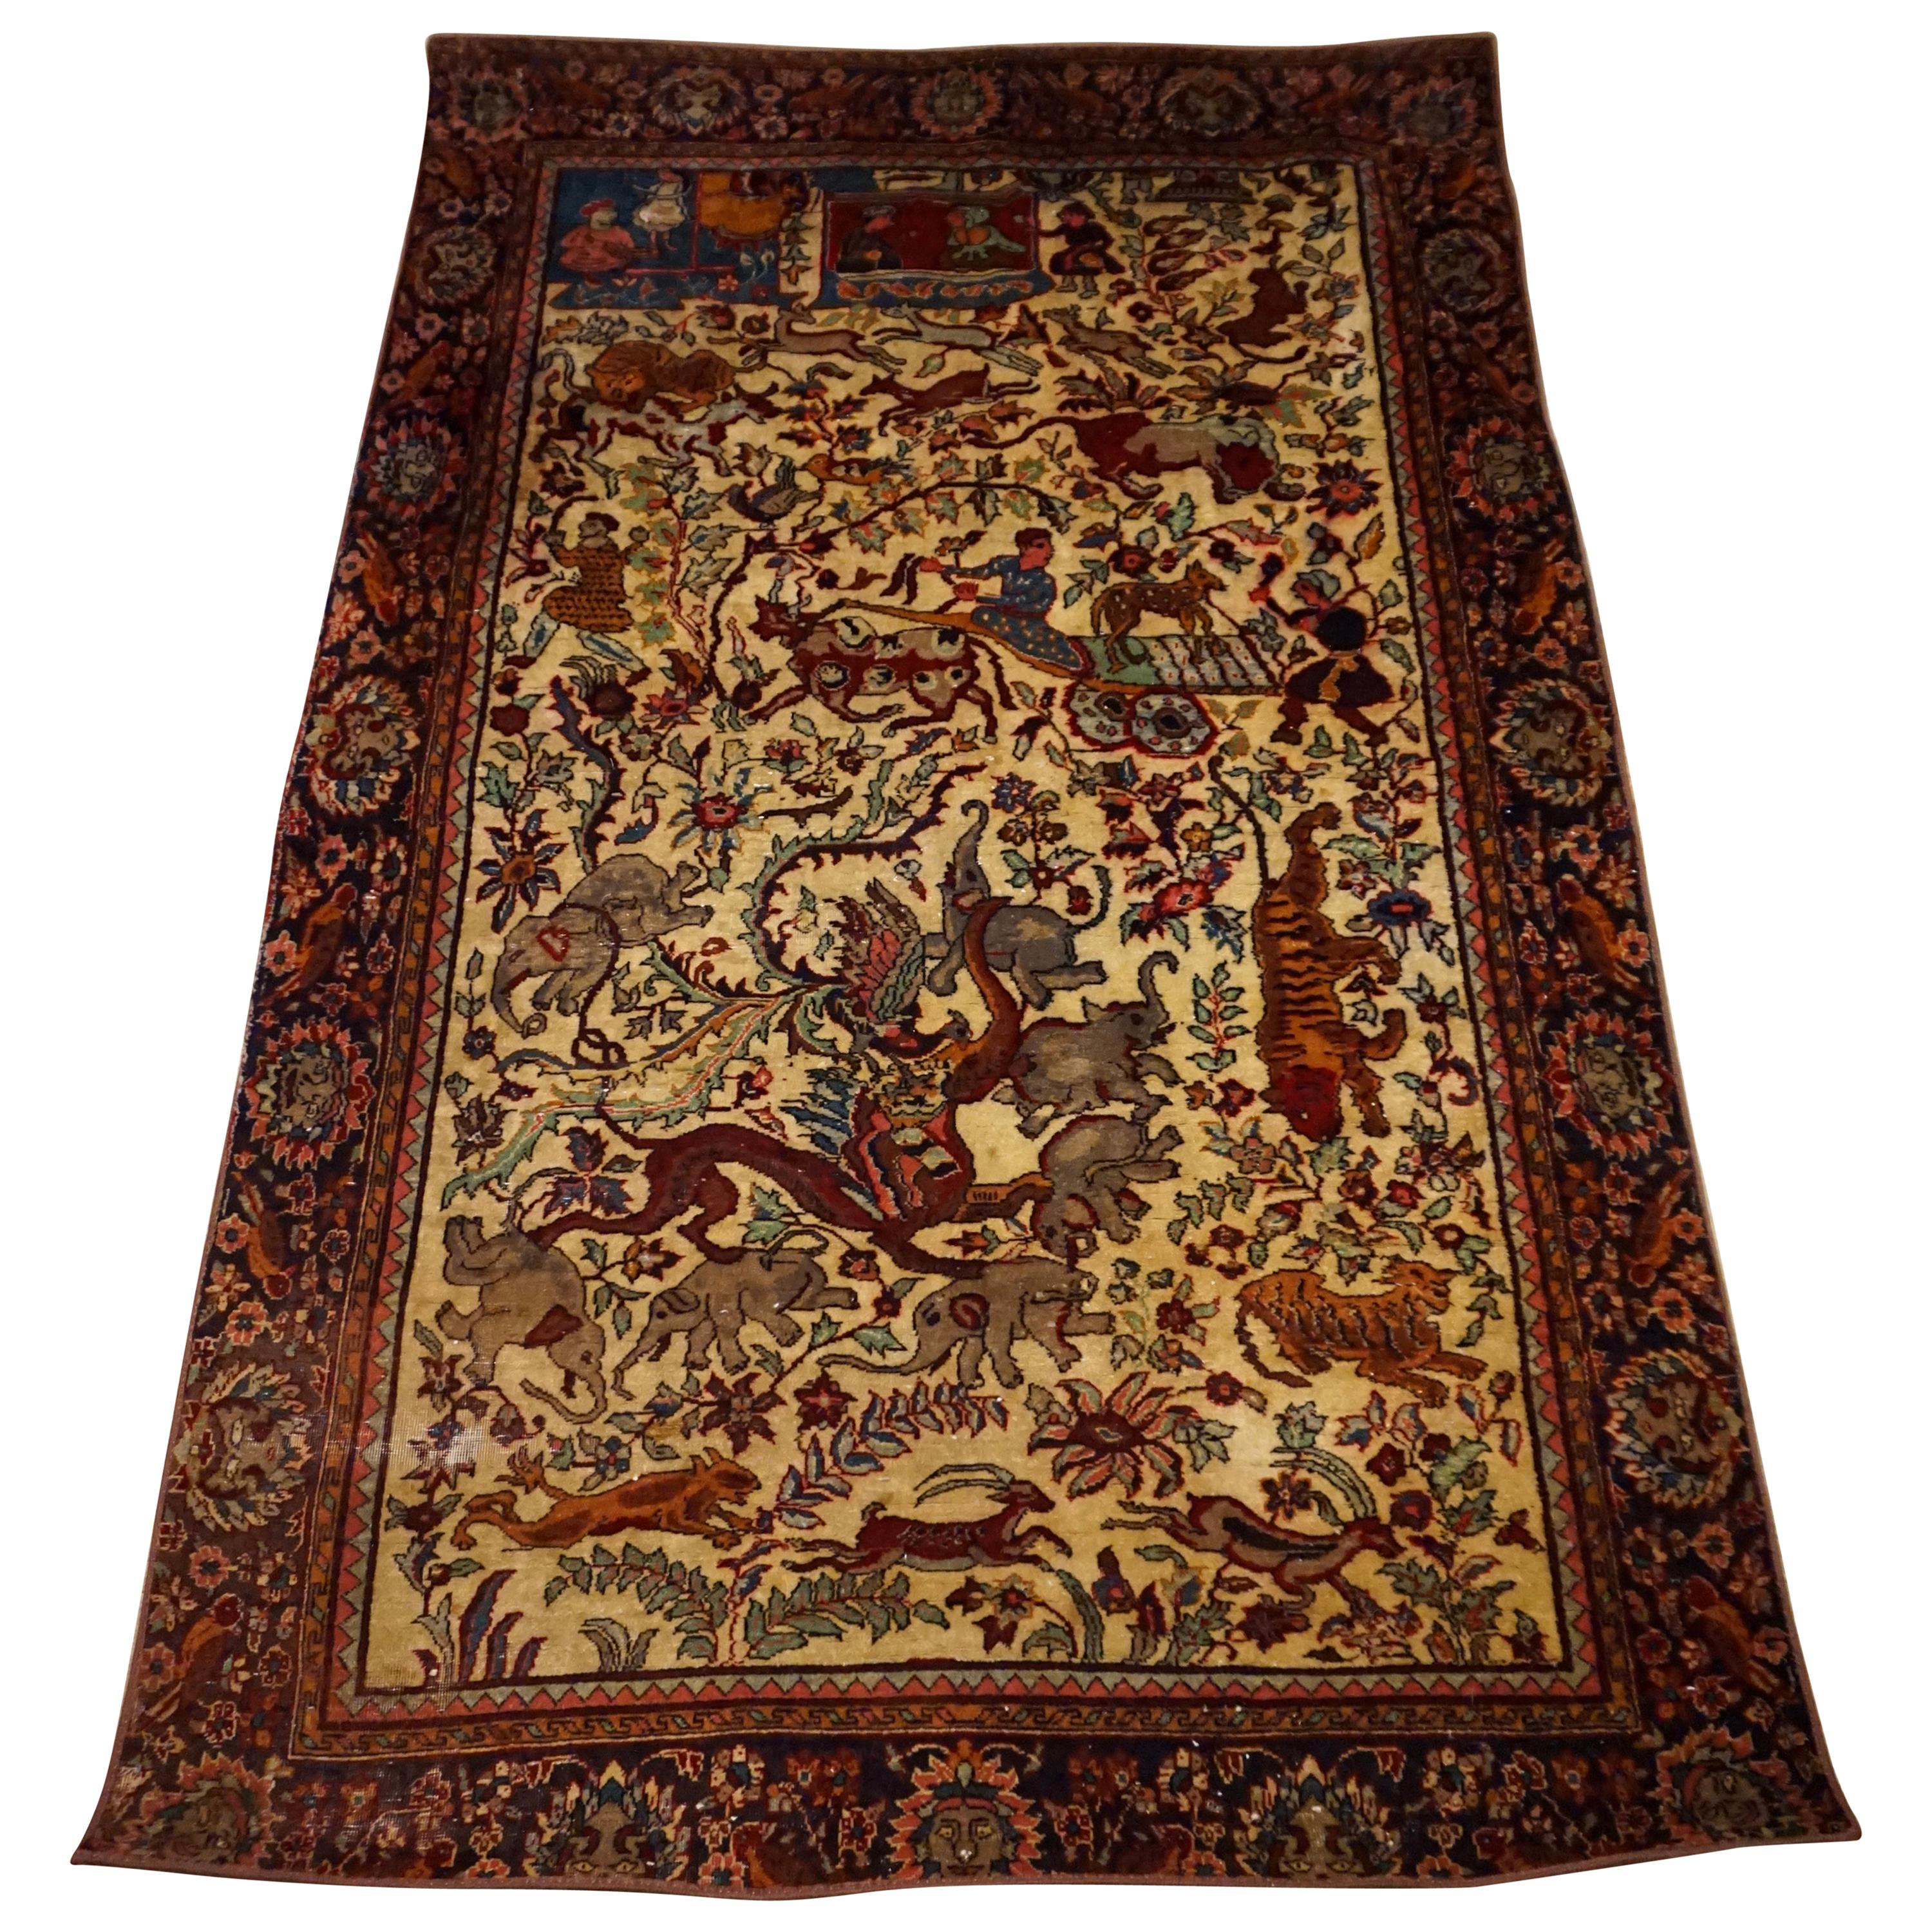 19th C. Agra Rug with Maharaja and Hunting Scene Tigers, Elephants Symbolism For Sale